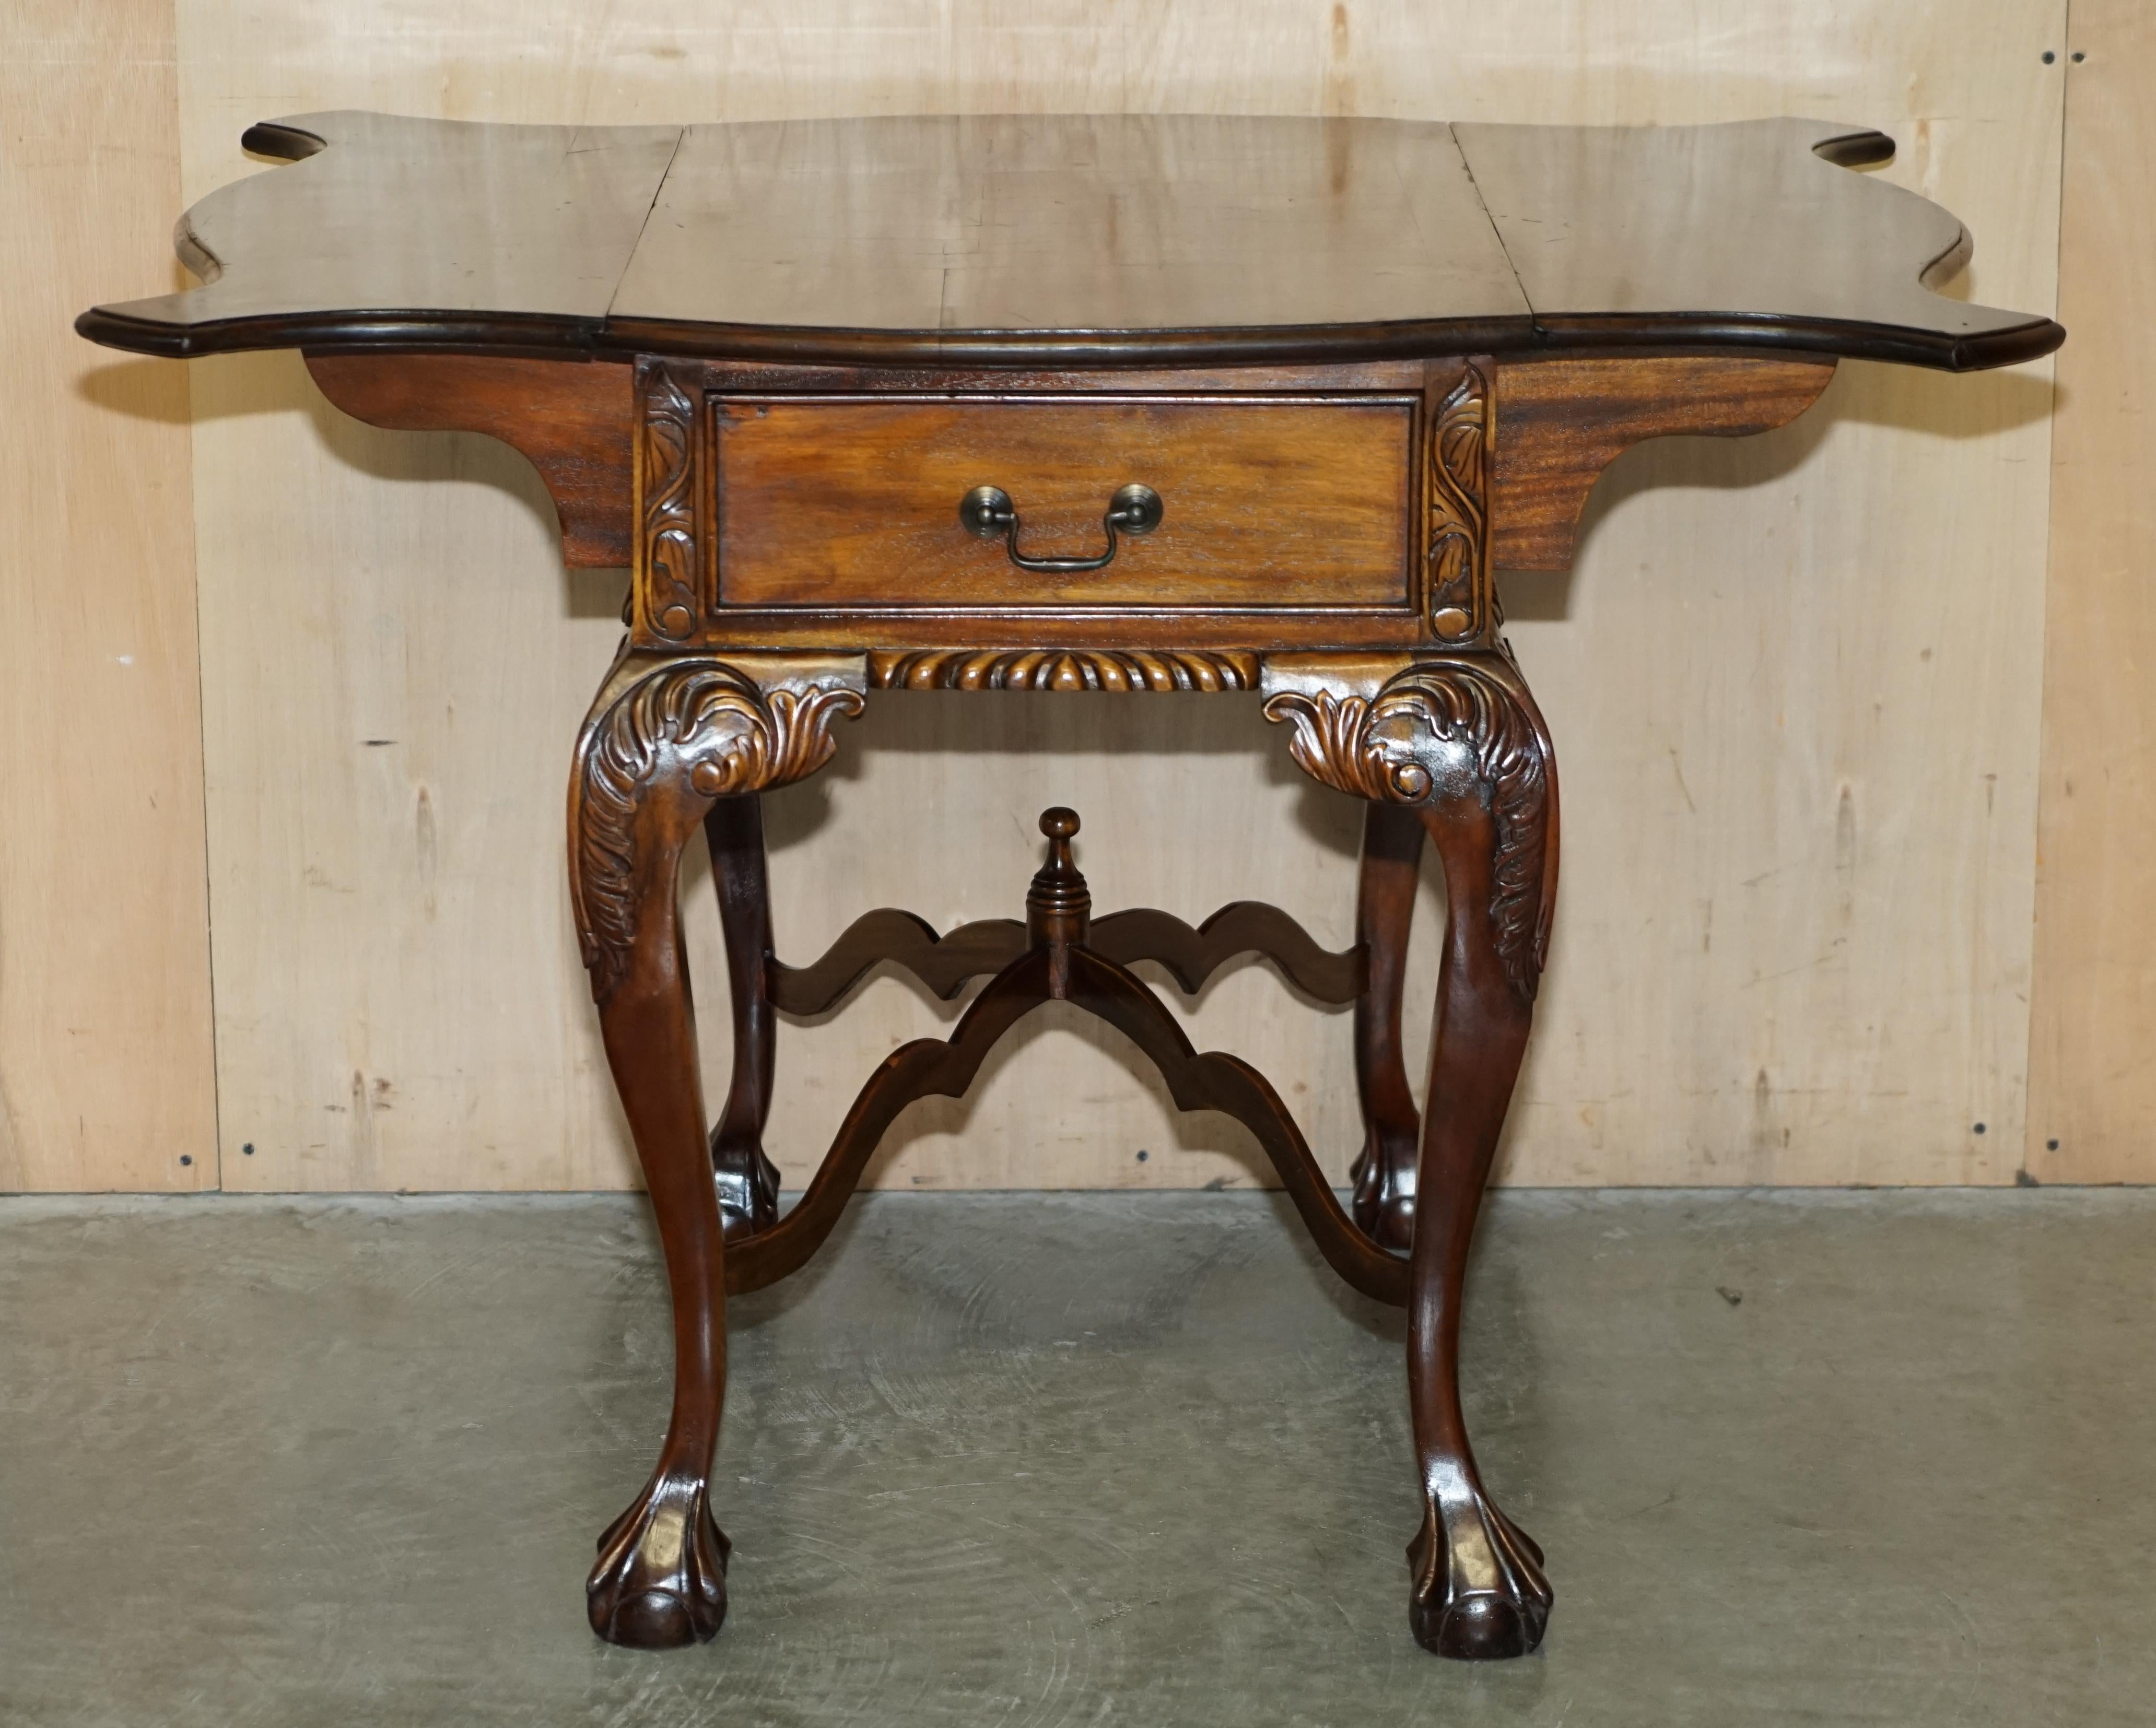 EXQUISITE THOMAS CHIPPENDALE STYLE CLAW & BALL FEET EXTENDiNG CHESS BOARD TABLE For Sale 2